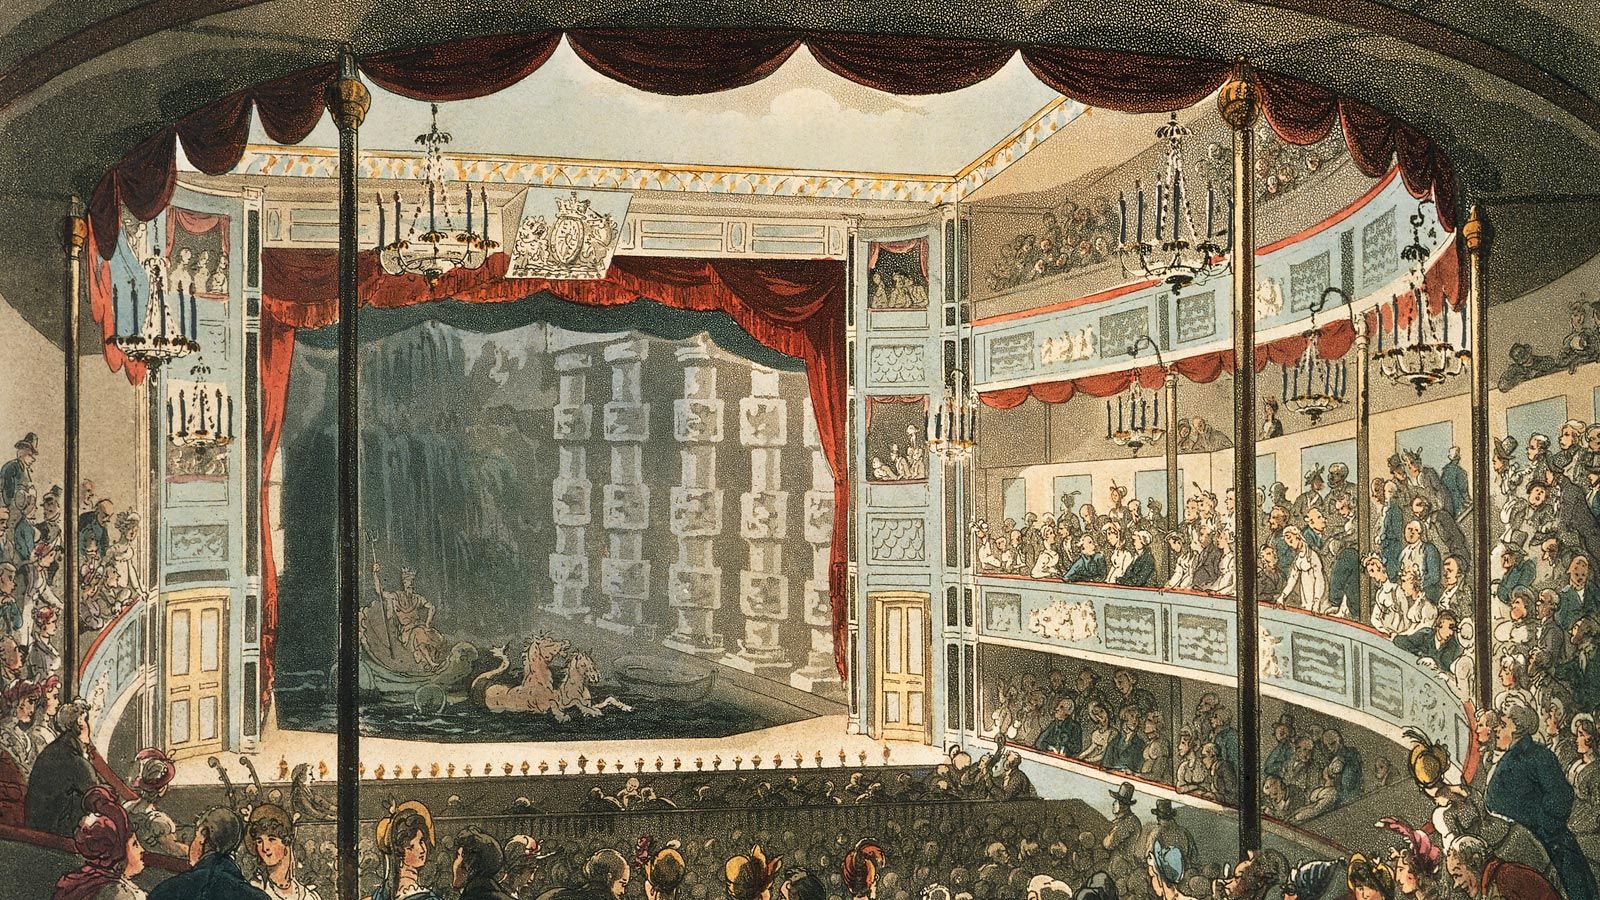 Exploring 19th Century Drama in English Literature: A Journey through Victorian Theatrical Masterpieces